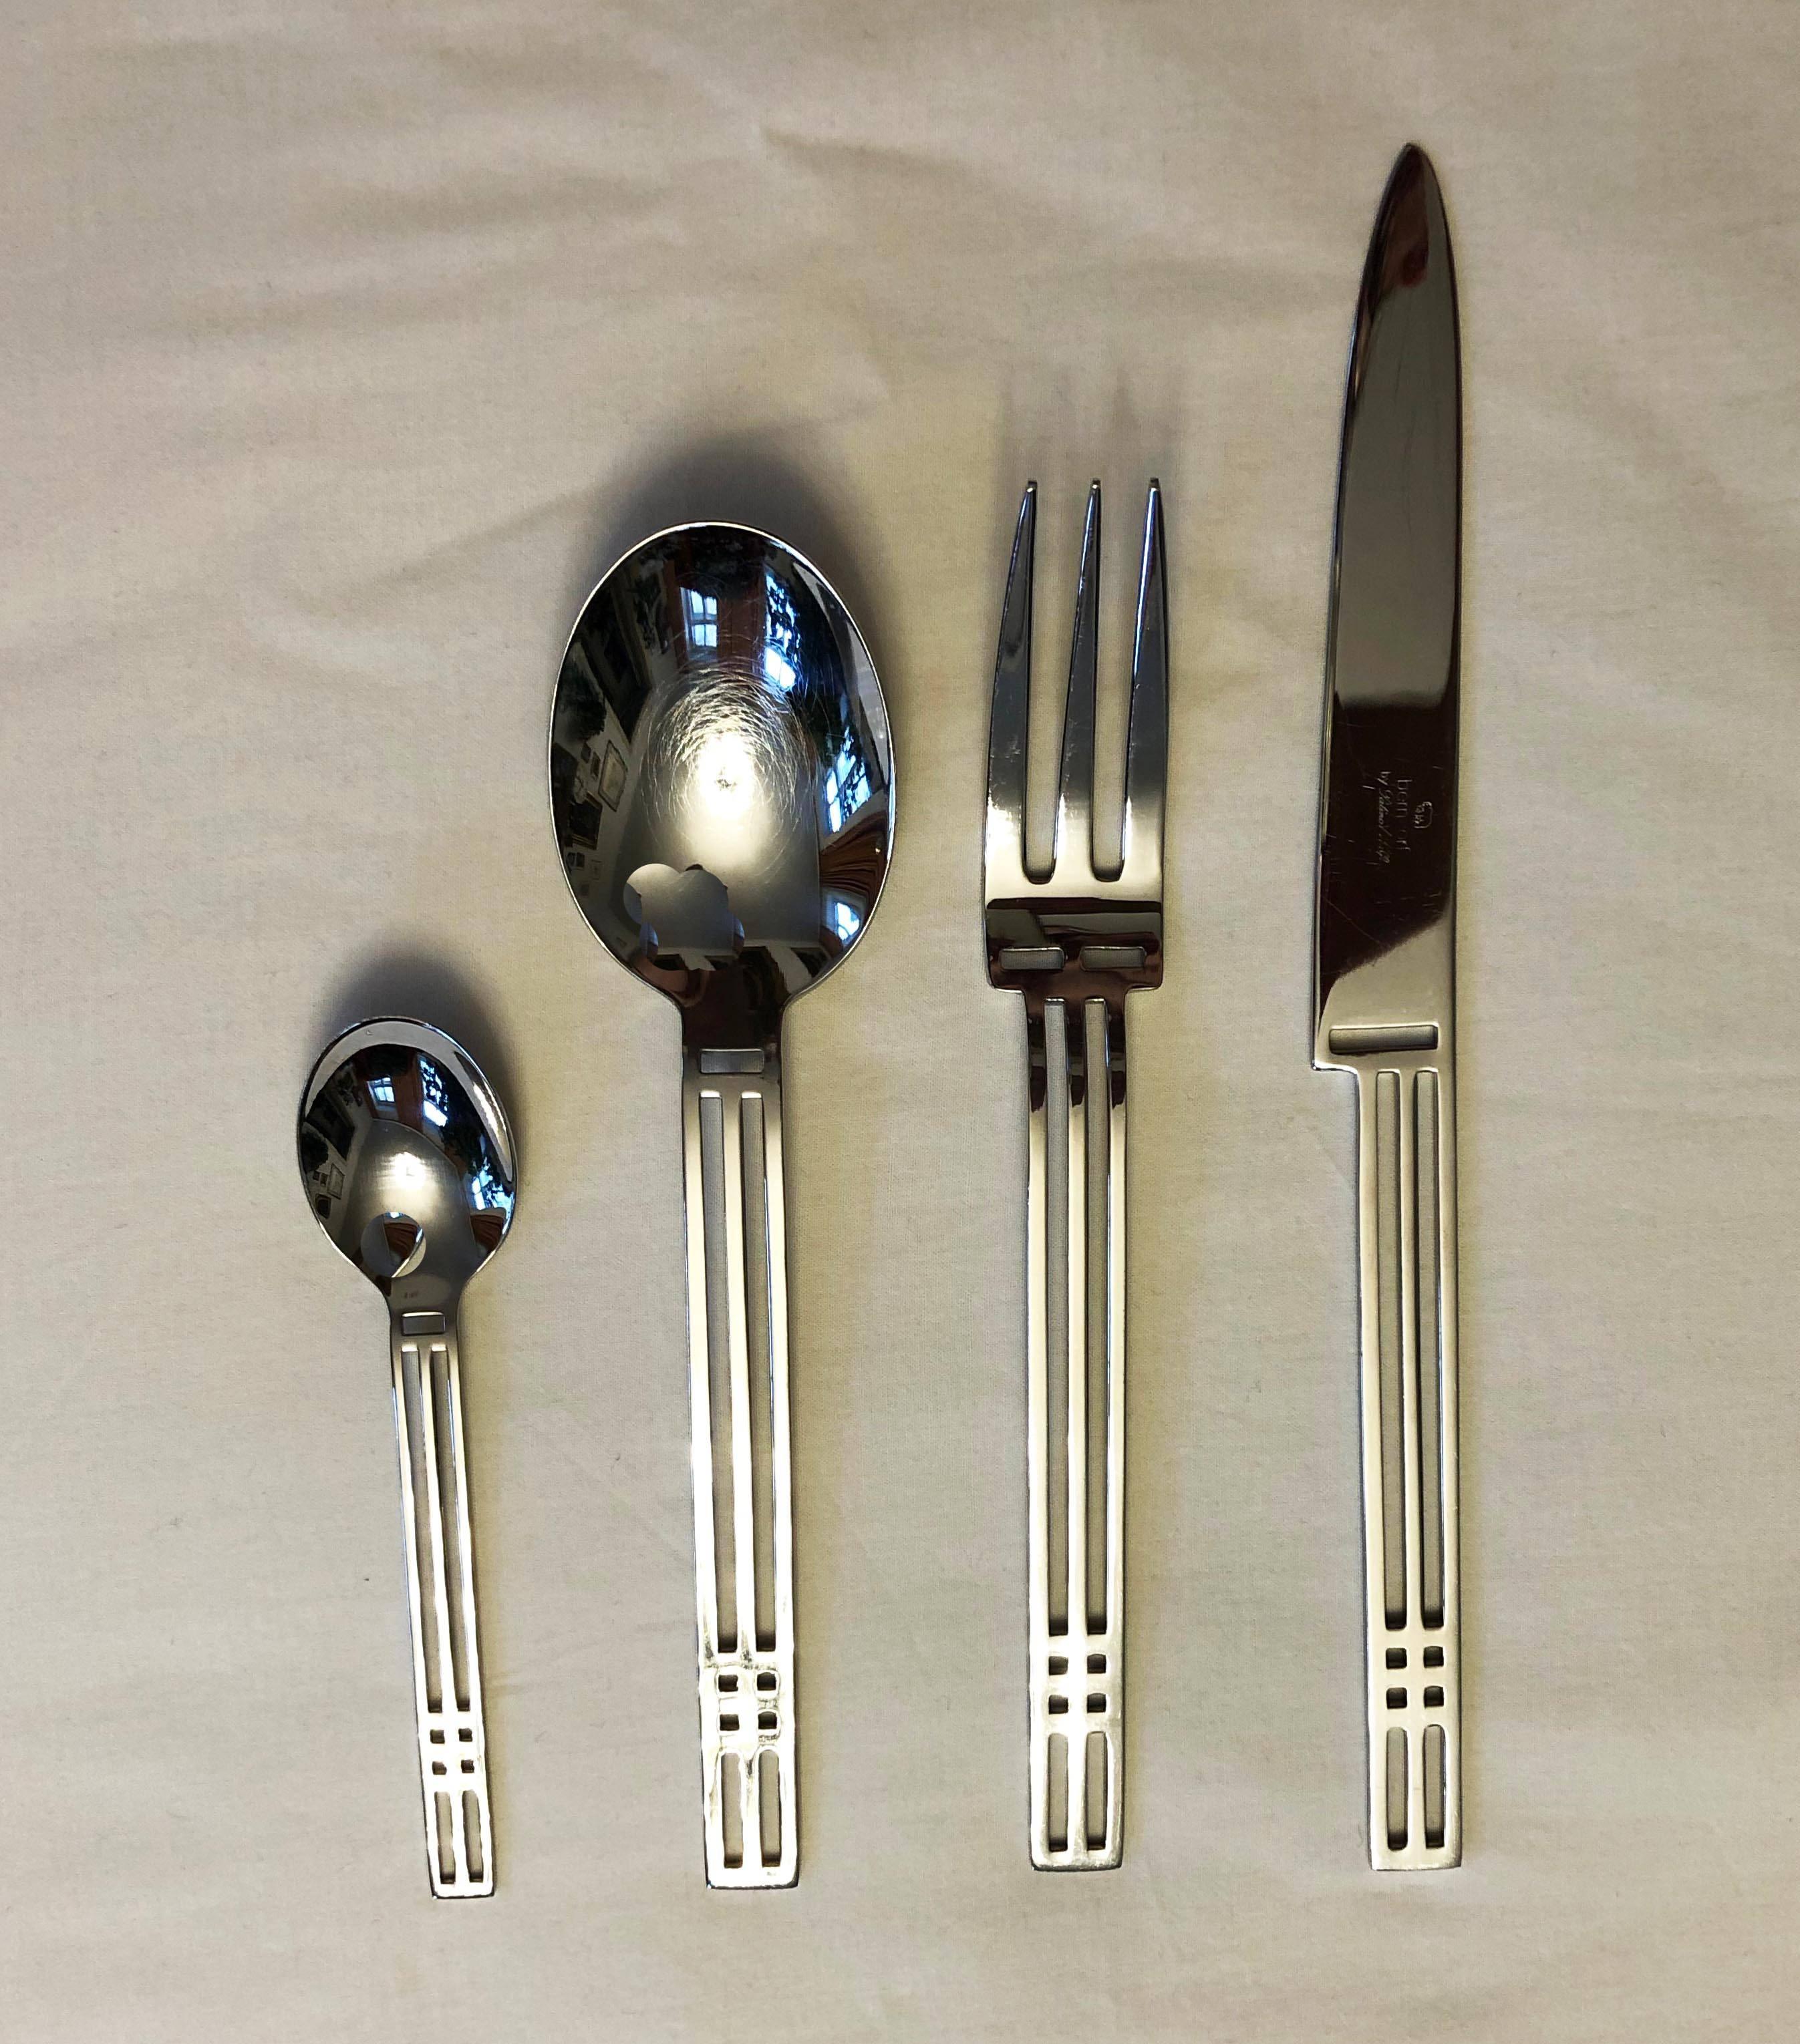 Designed by famous New York designers duo Bob Patino (1942-1998) and Vincente Wolf in 1991.
Stainless steel. Handles long and broad with rectangular openings. Reminiscent of Charles Rennie Mackintosh.
Dimensions: Knife 25.4cm, fork 20.8cm, spoon